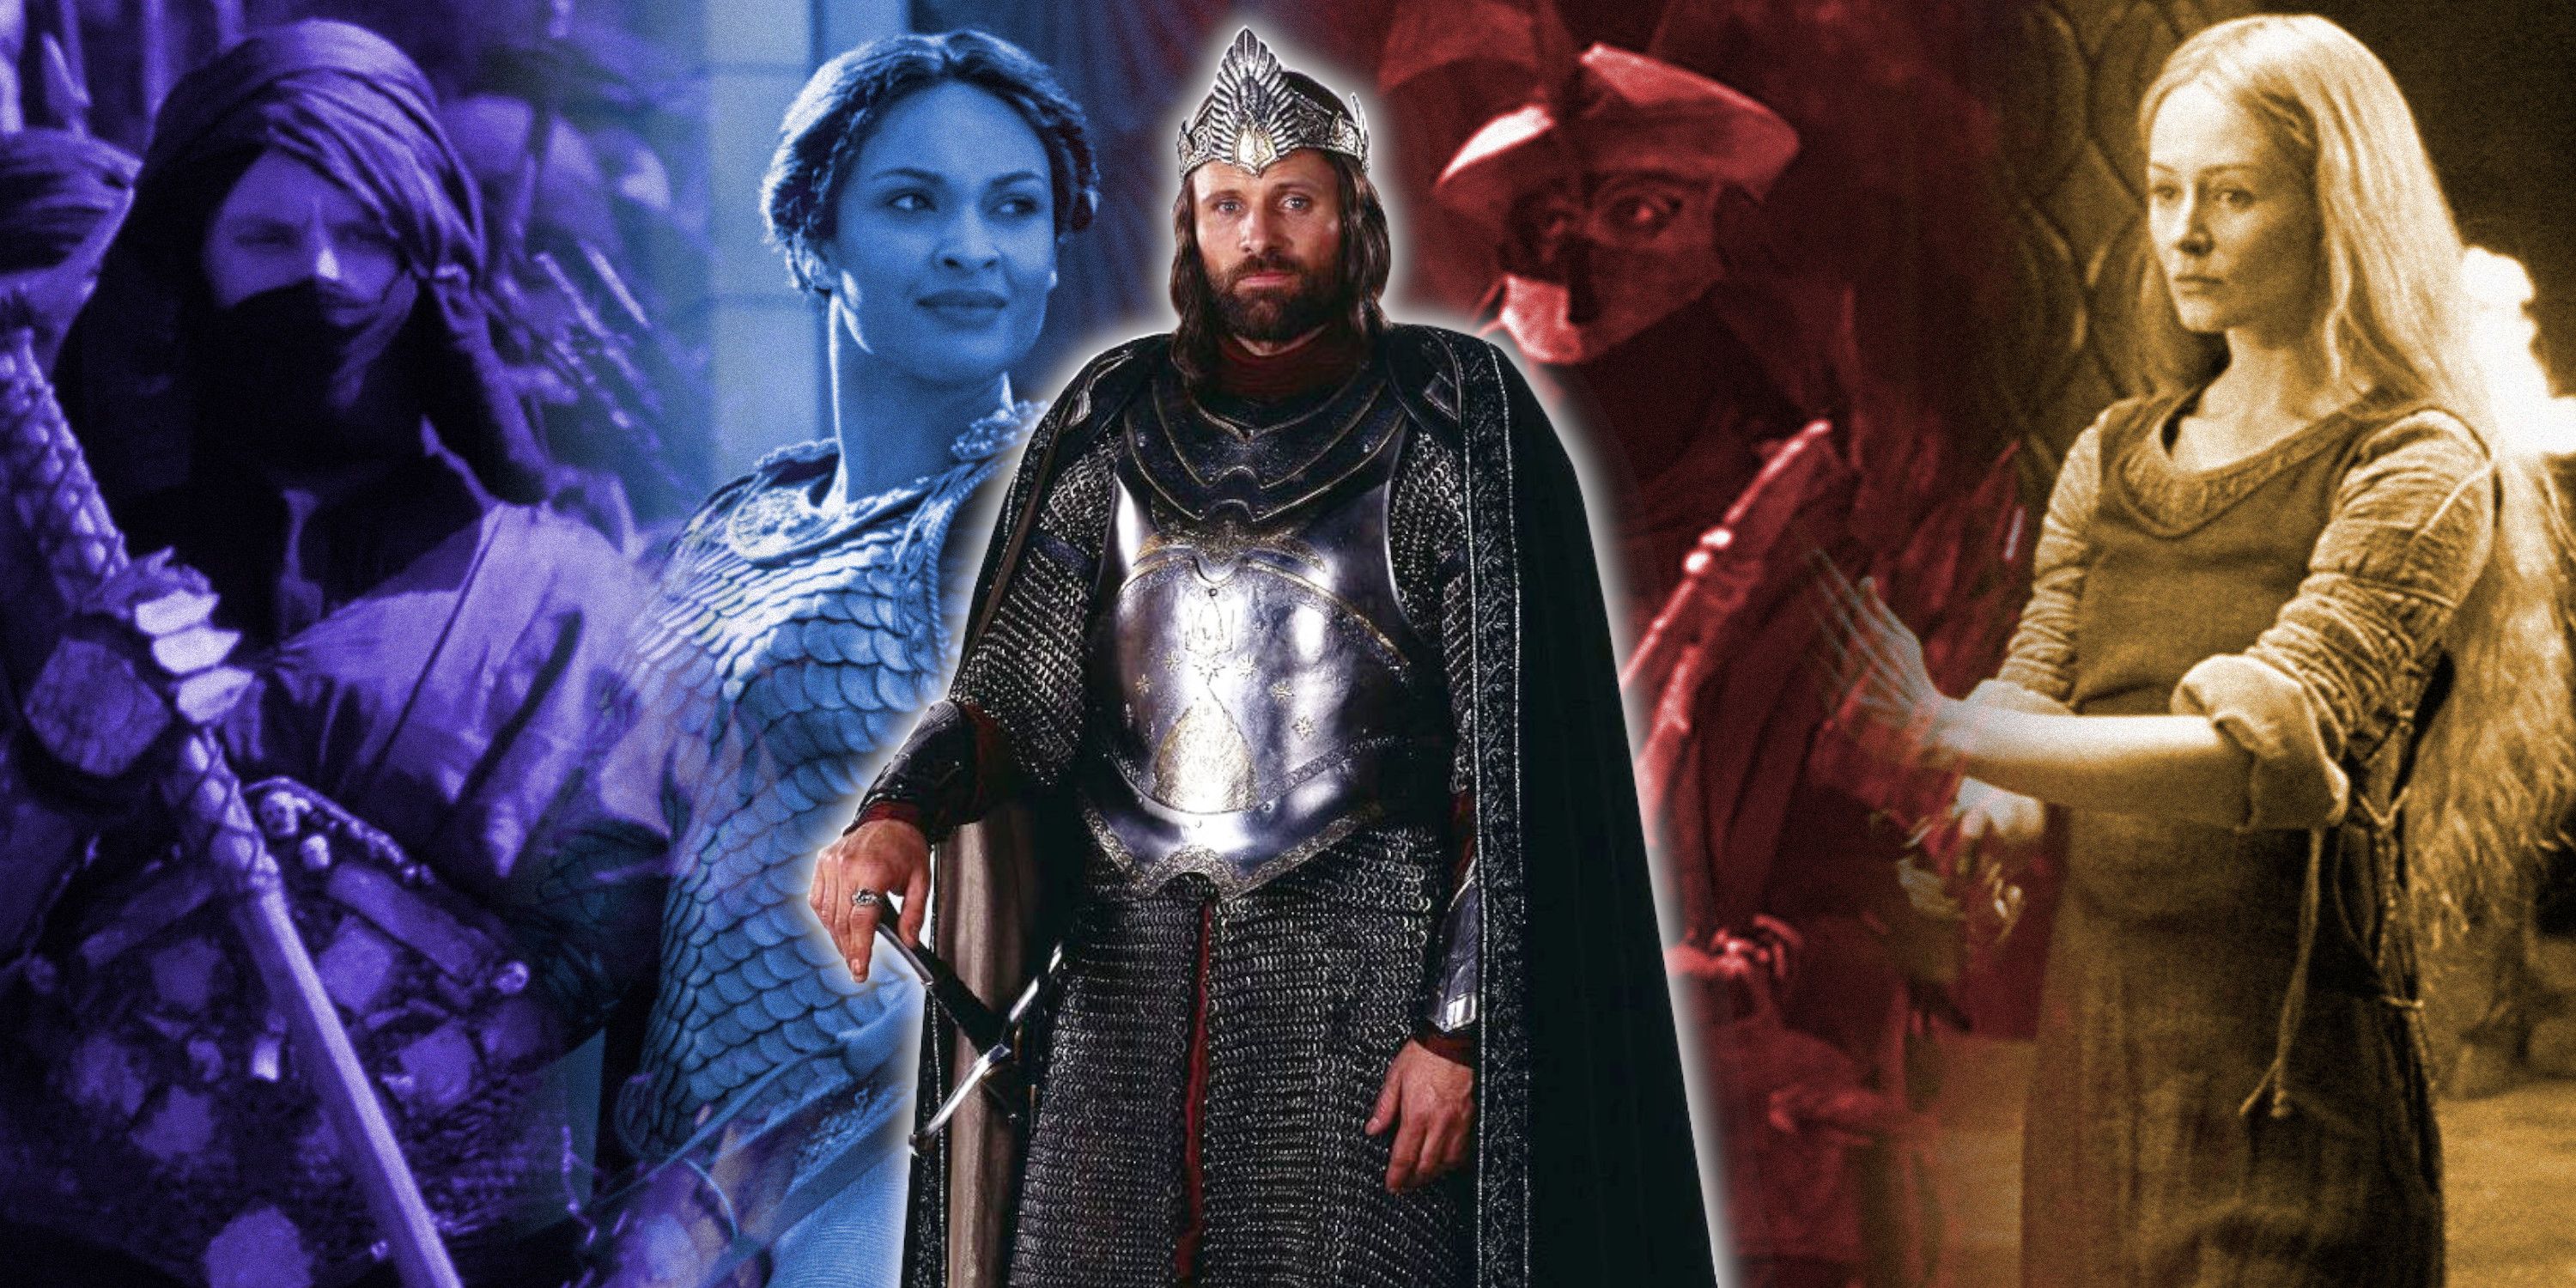 Aragorn in front of a Haradrim, Miriel, an Easterling, and Eowyn from The Lord of the Rings